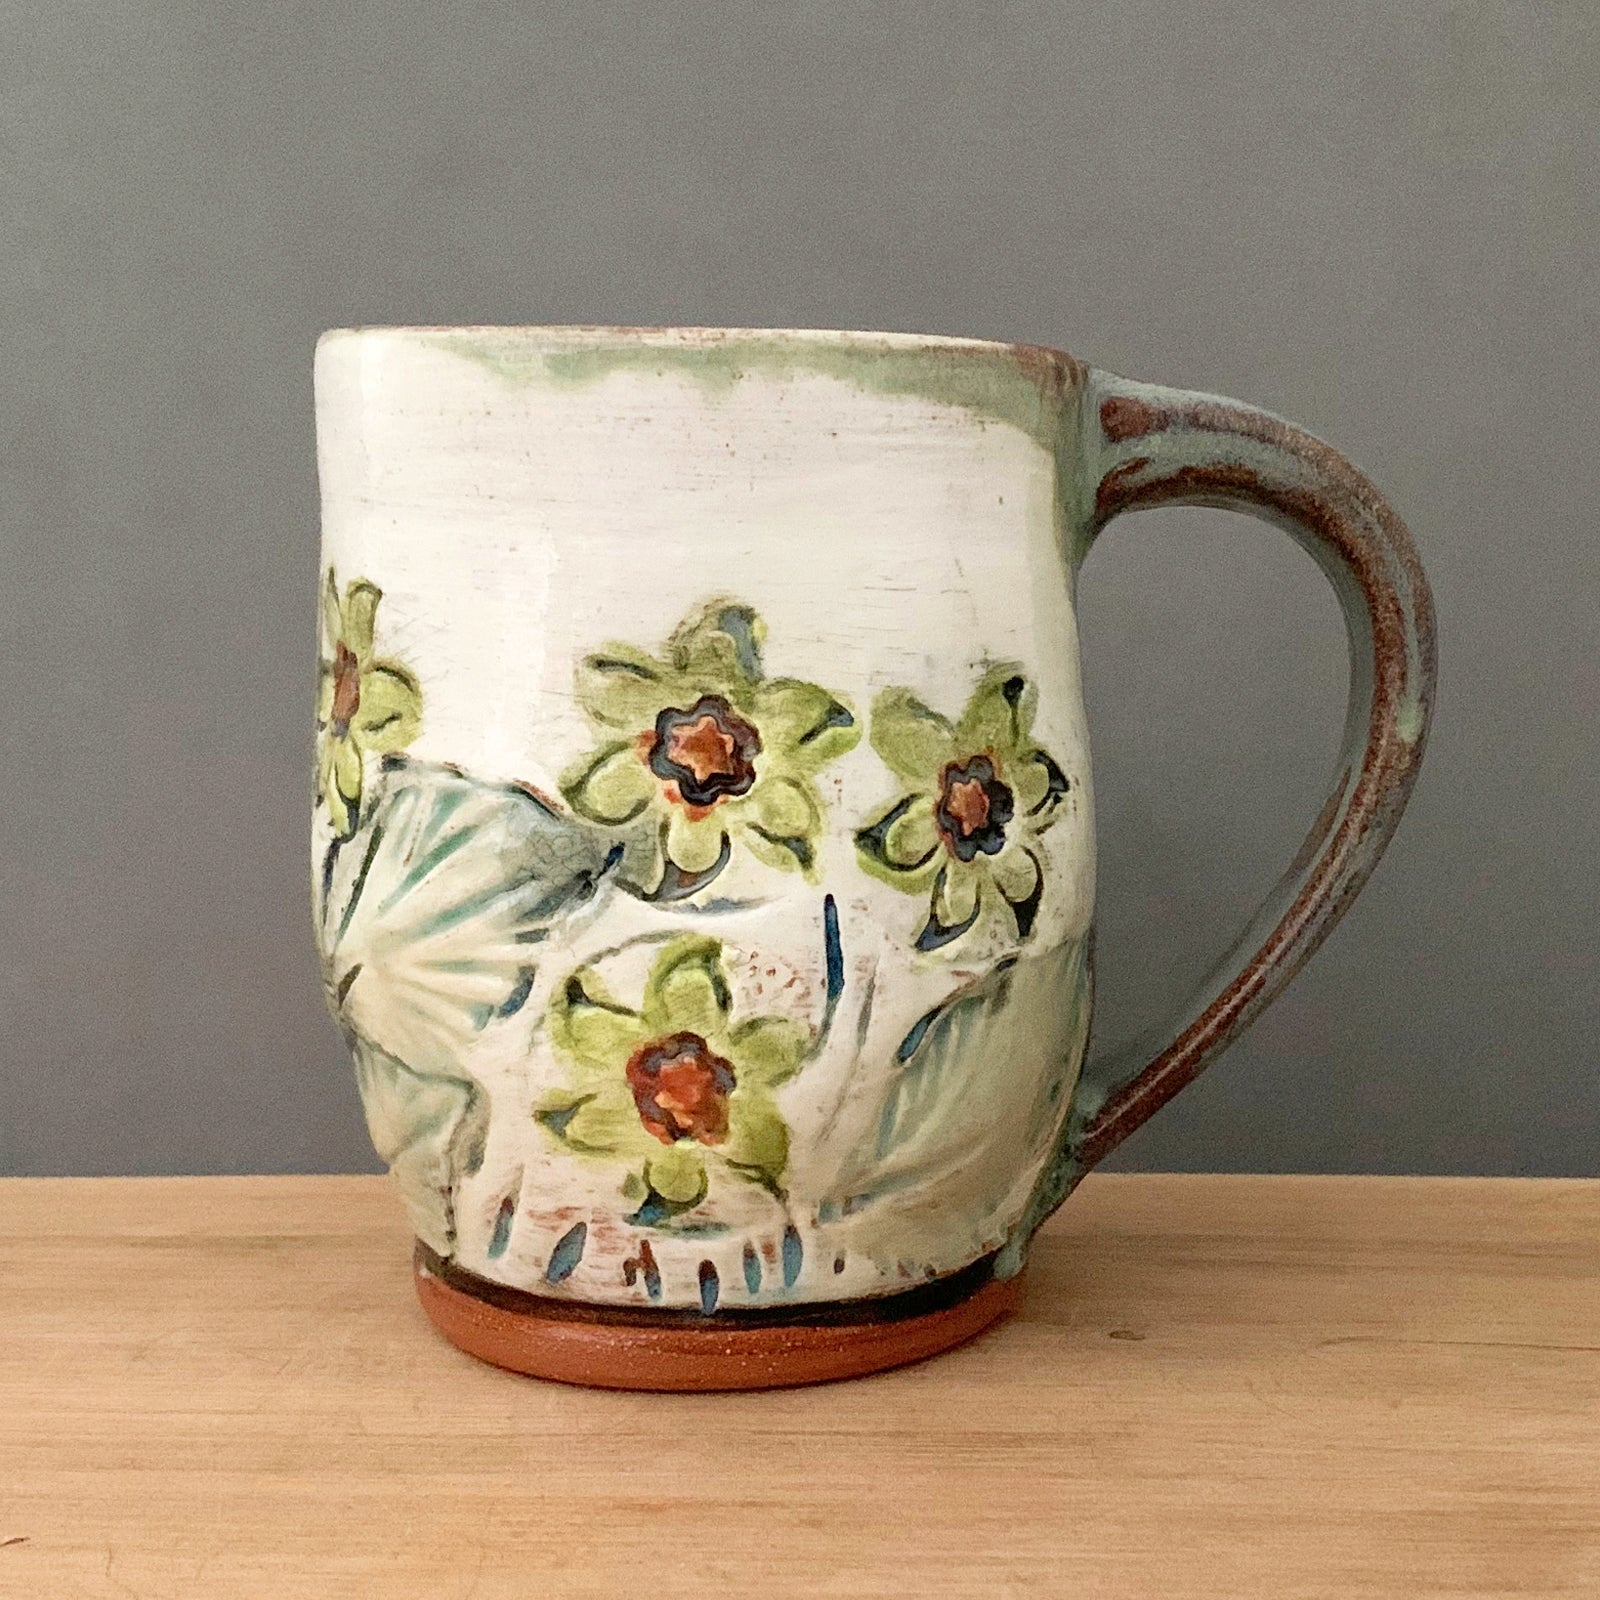 Handmade ceramics from local and national ceramic artists at Lark and Key, Charlotte NC. Shop online or locally by appointment.